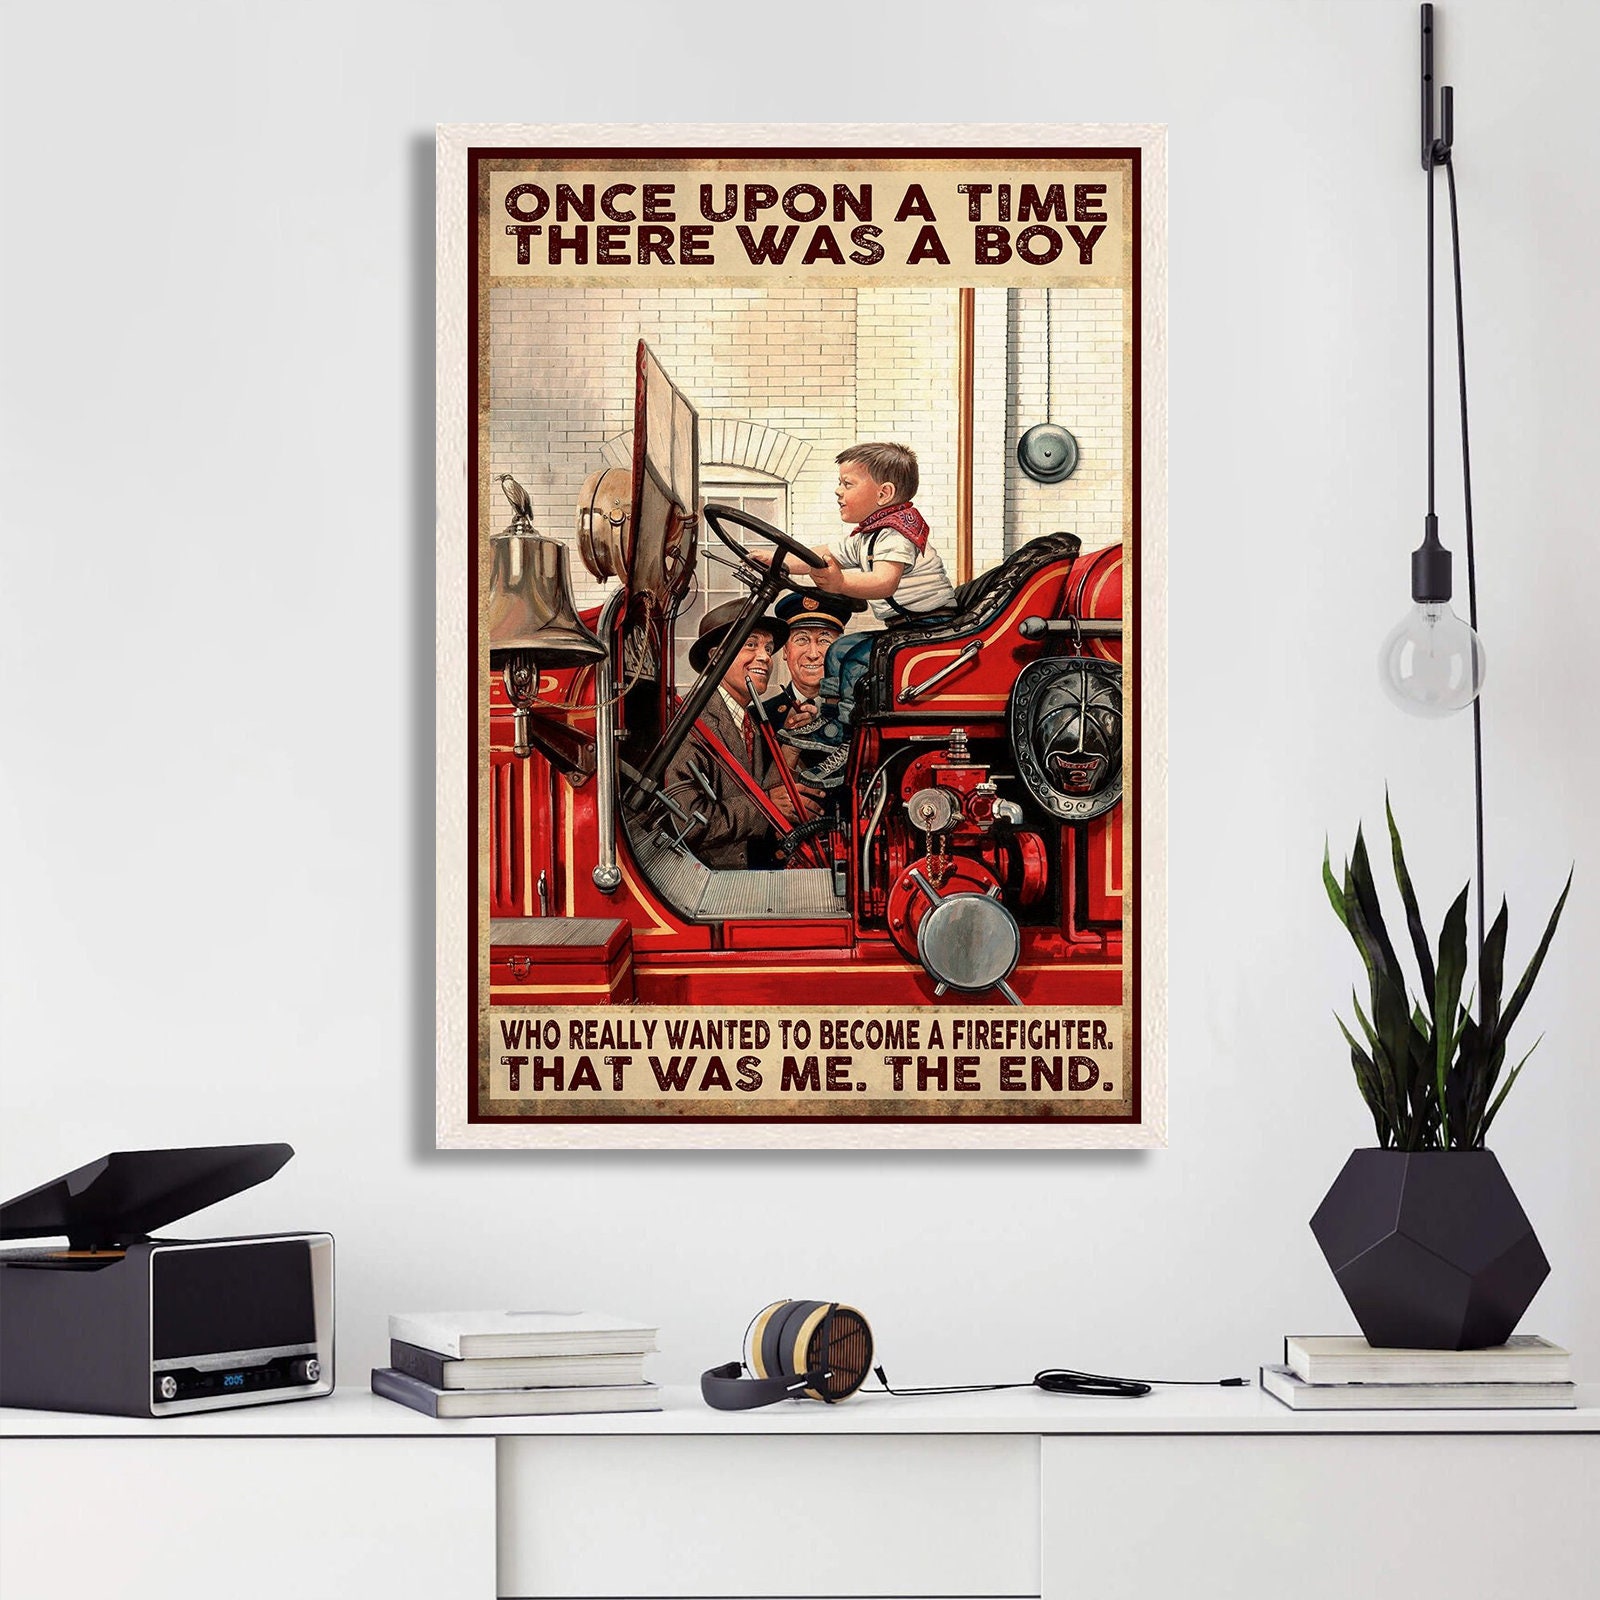 Discover Firefighter Once Upon a Time There Was a Boy Poster, Bathroom Wall Decor, Bathroom Wall Decor, Funny Firefighter Poster, Wall Art Home